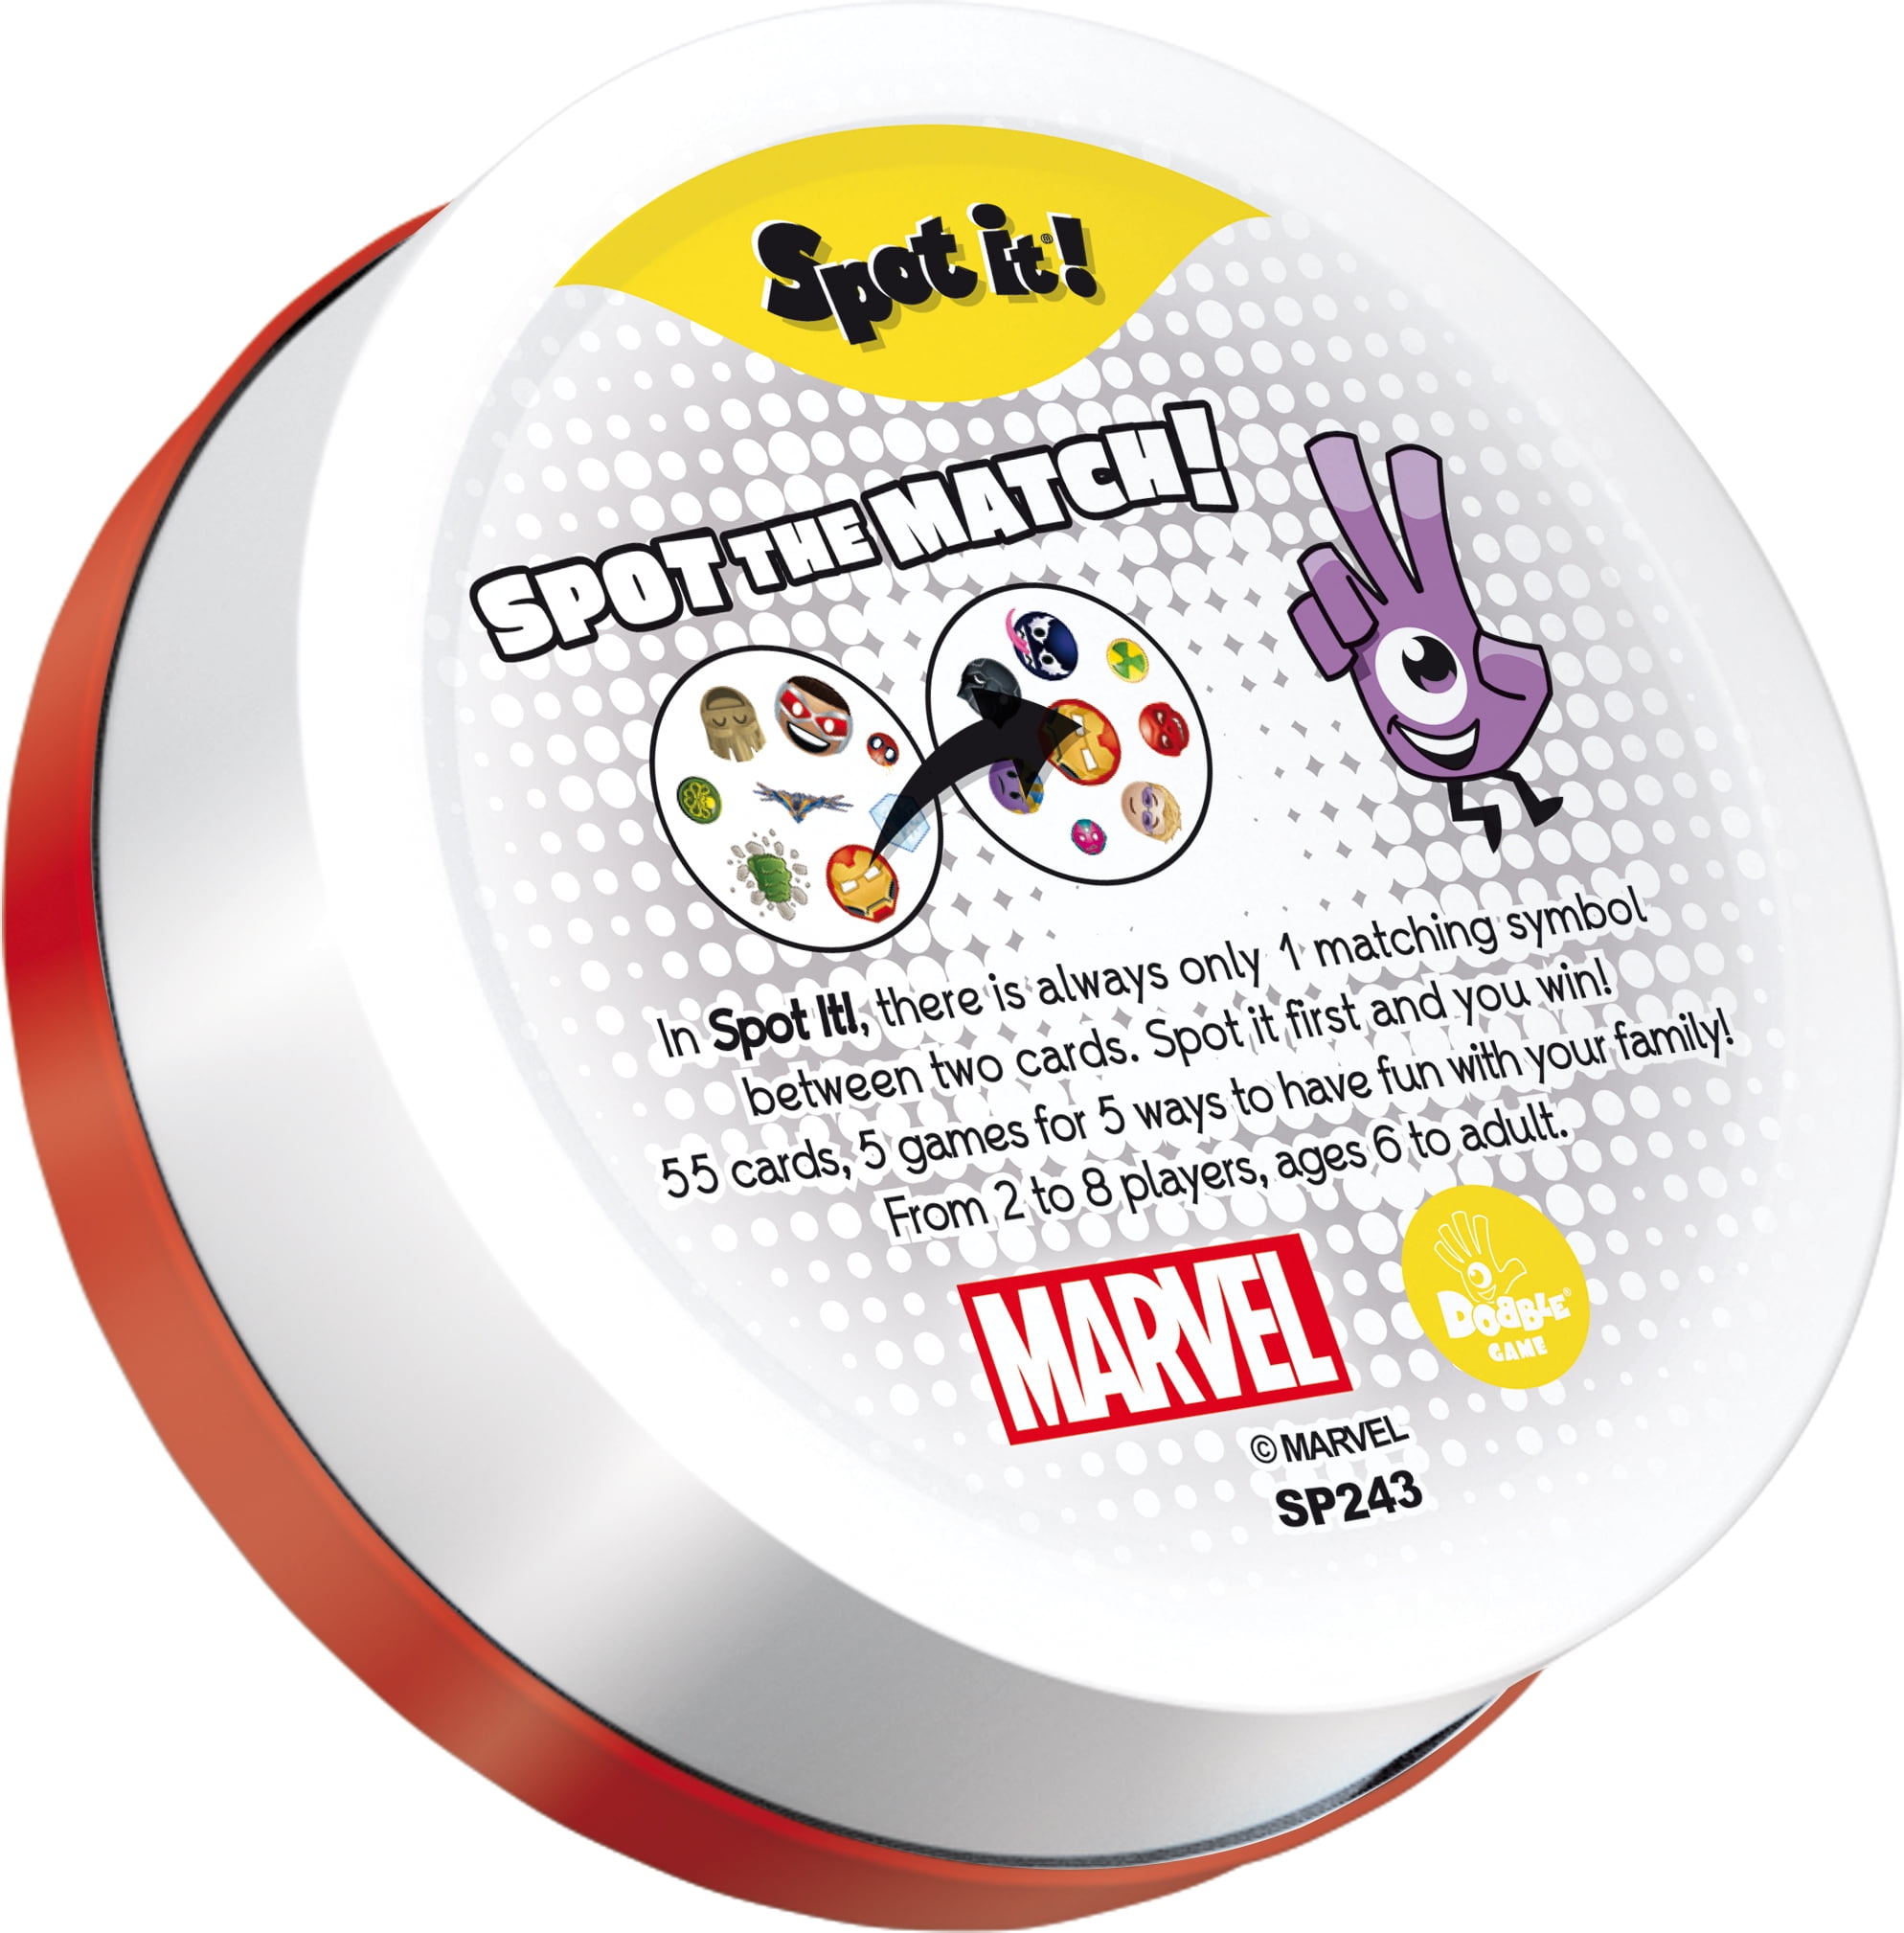 Zygomatic Spot It! Marvel Emojis - Marvel Super Heroes Family Card Game for  Superhero Fun! Fast-Paced Matching Game for Kids and Adults, Ages 6+, 2-8